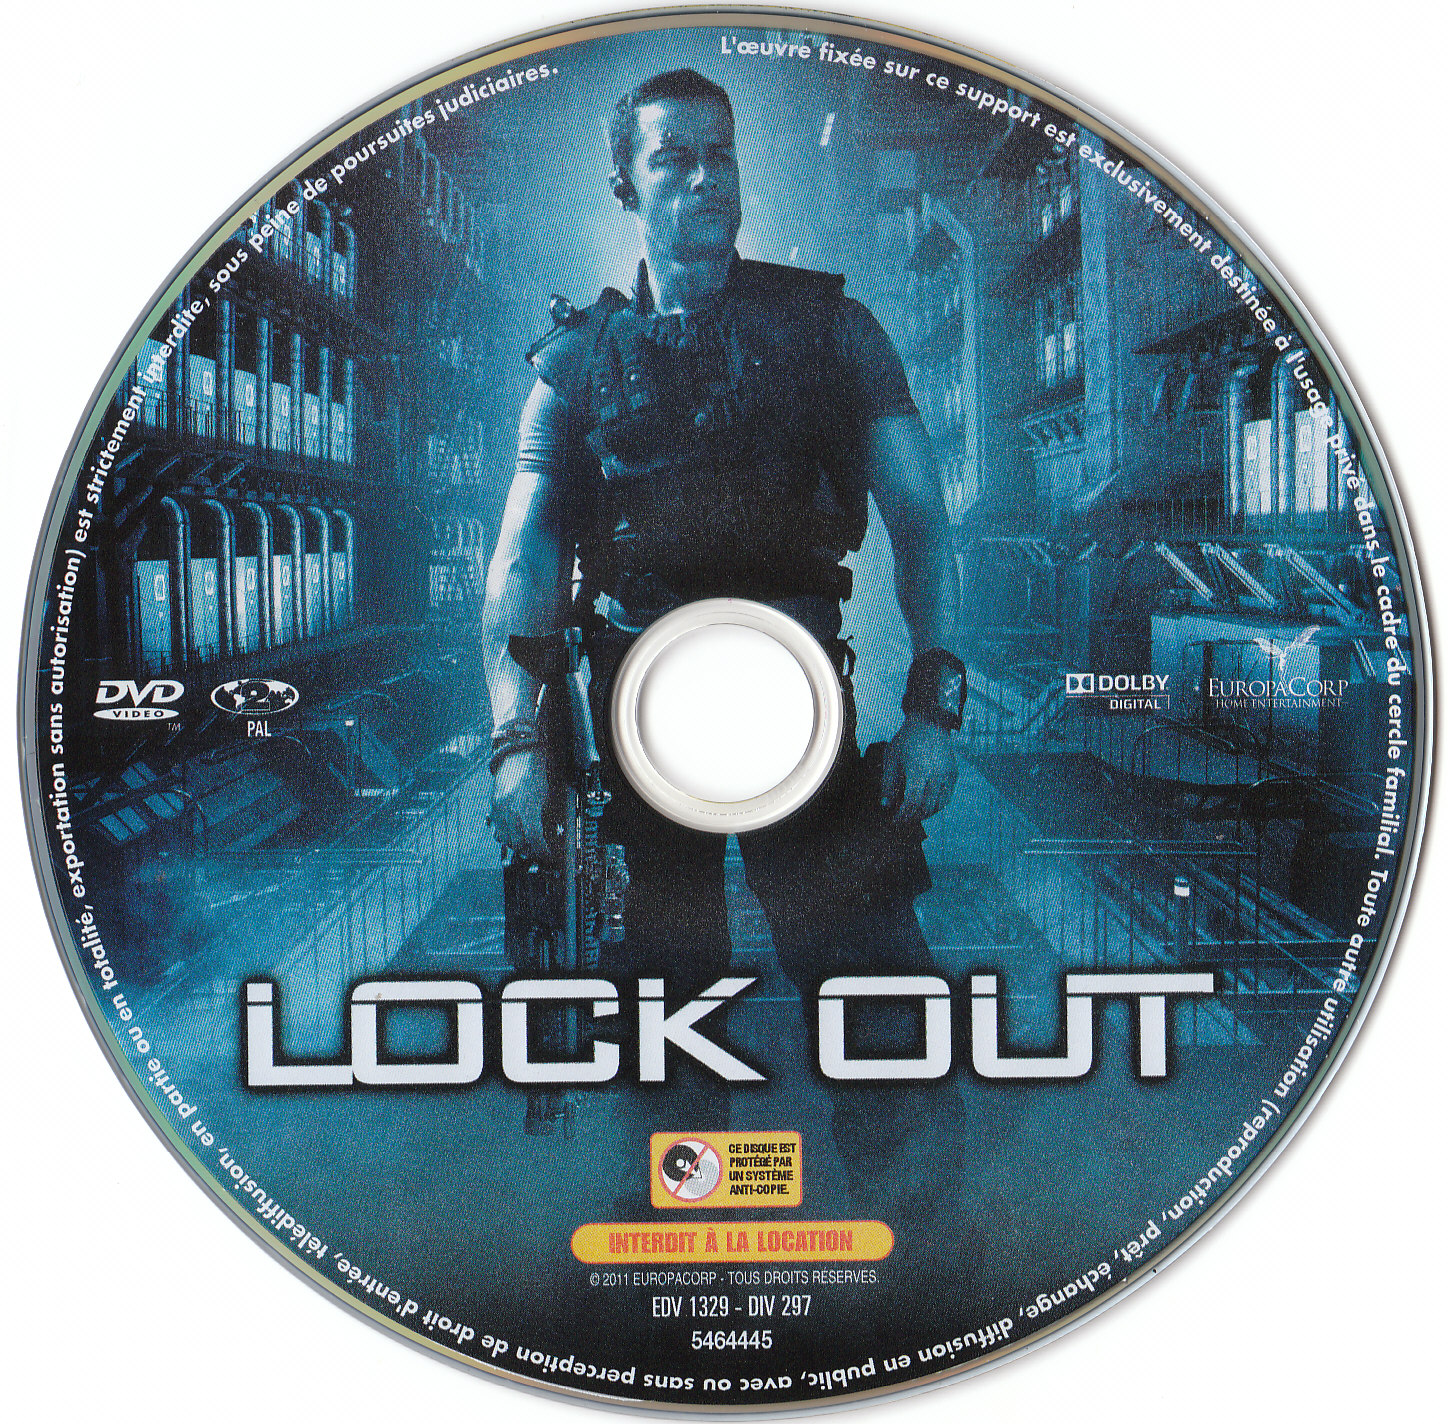 Lock out